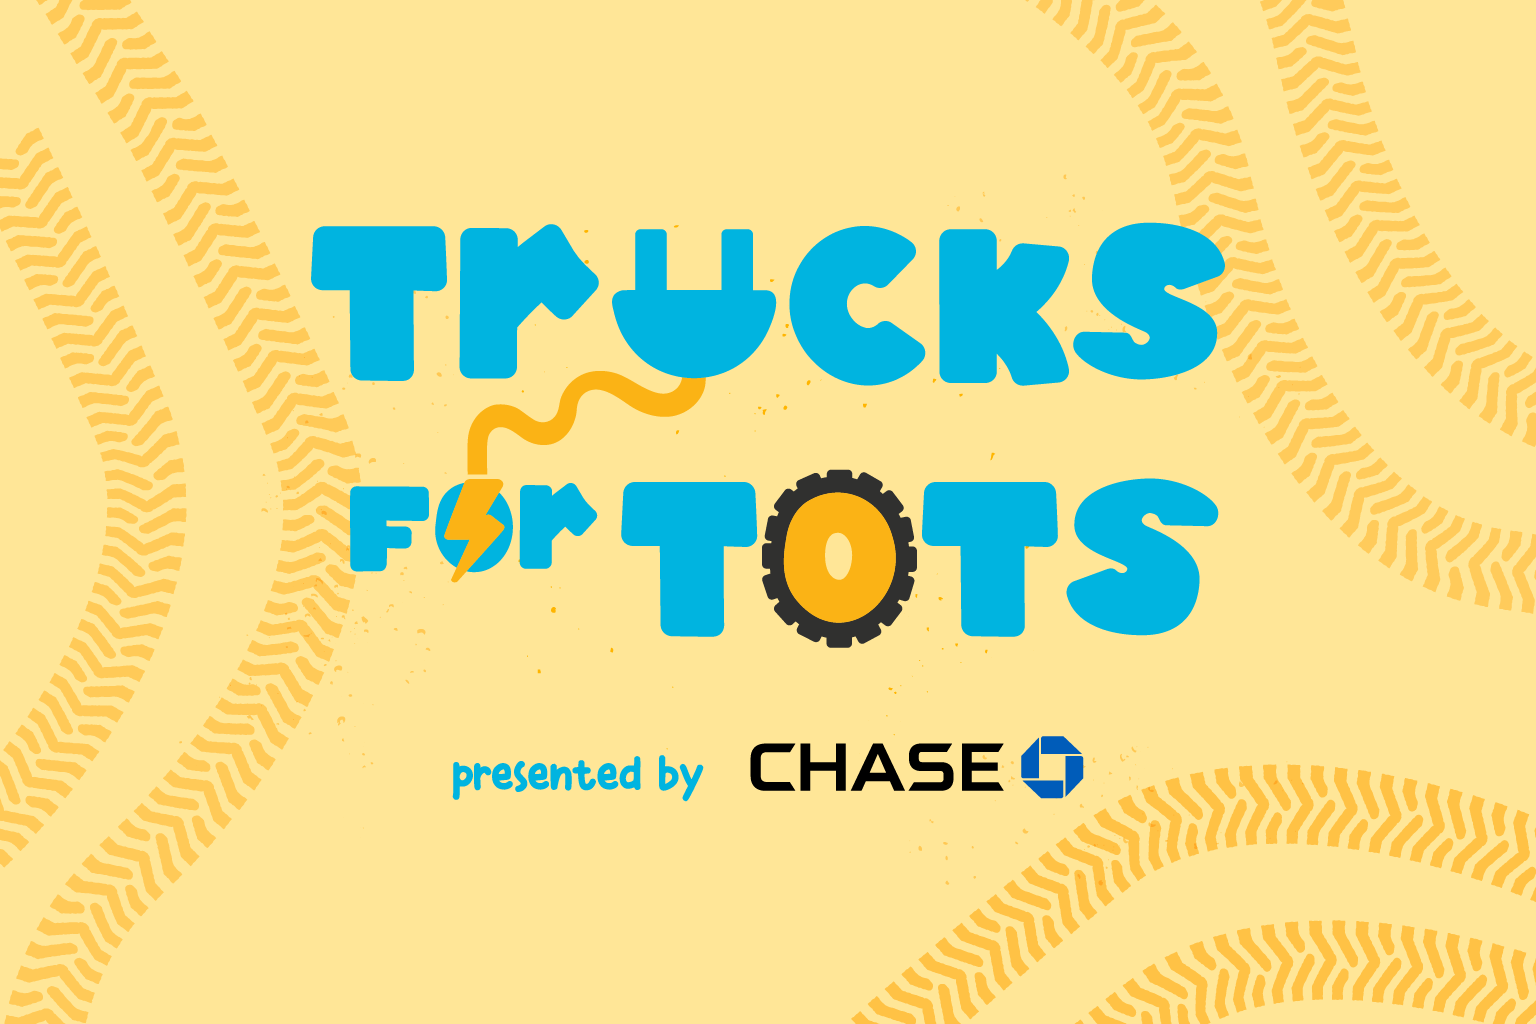 Trucks for Tots presented by Chase